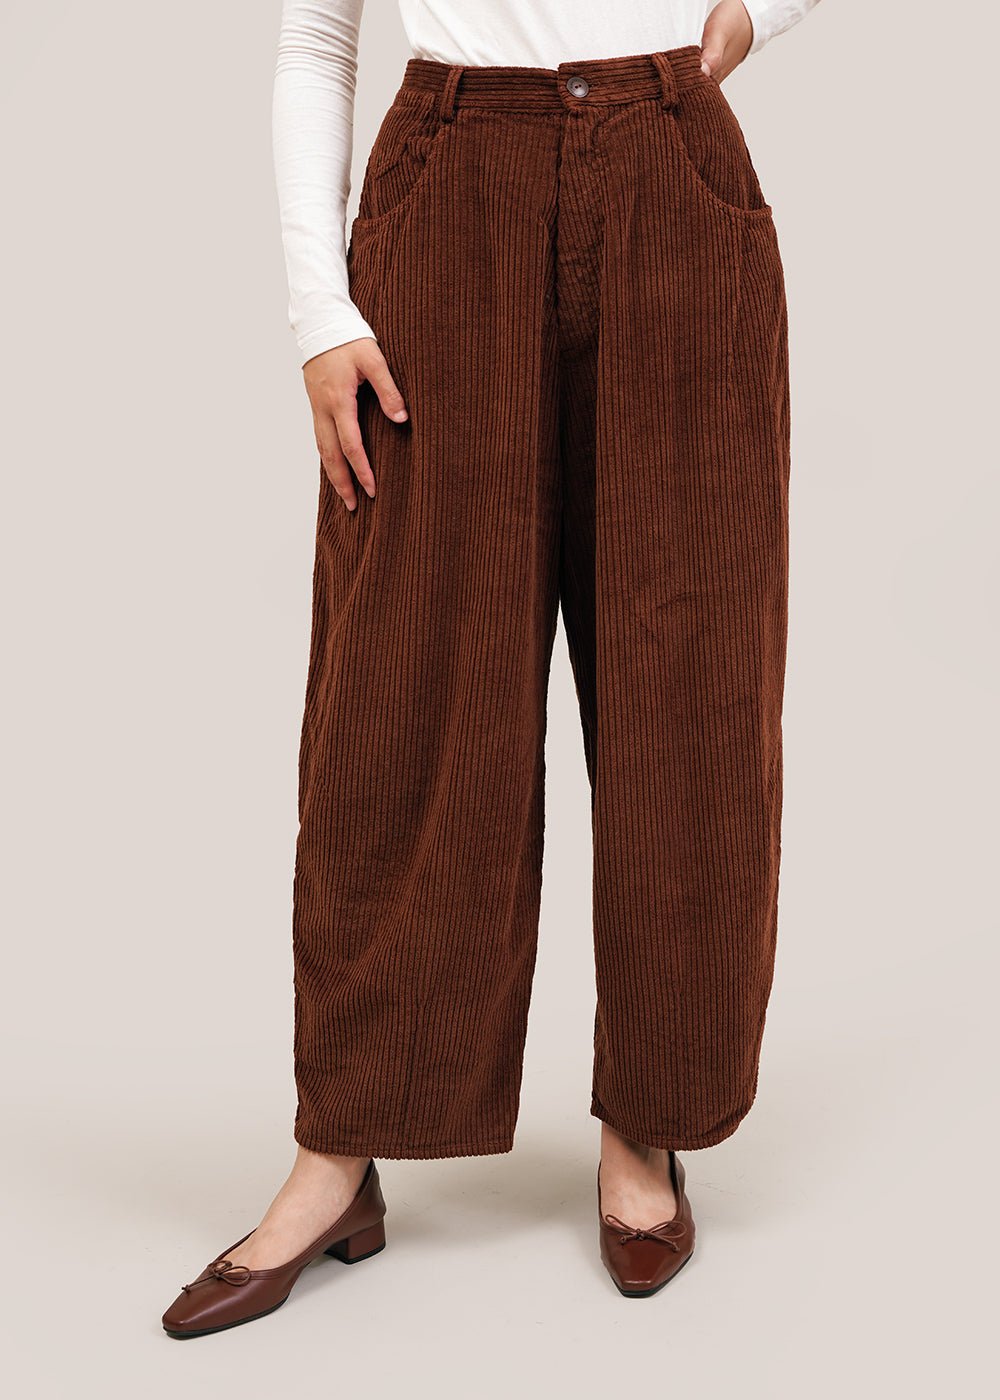 SIGNE PARIS Womens Designer Pants Brown Wide Leg Made in France Size 10 US  NEW